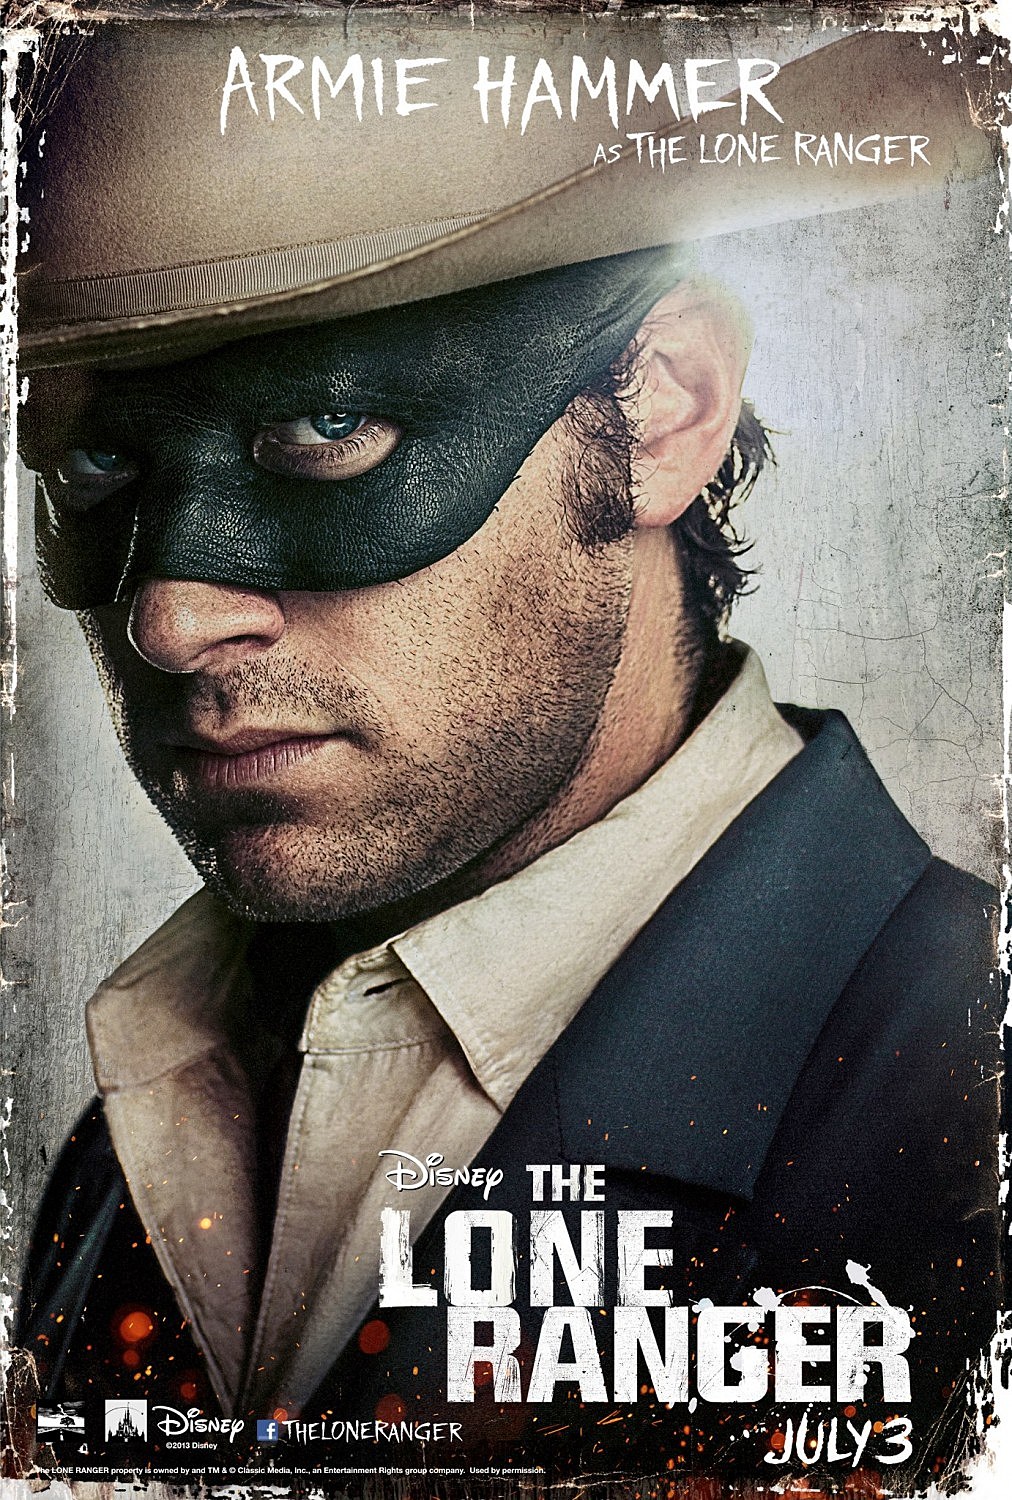 New 'The Lone Ranger' Posters Show Off Johnny Depp and Armie Hammer [UPDATE]